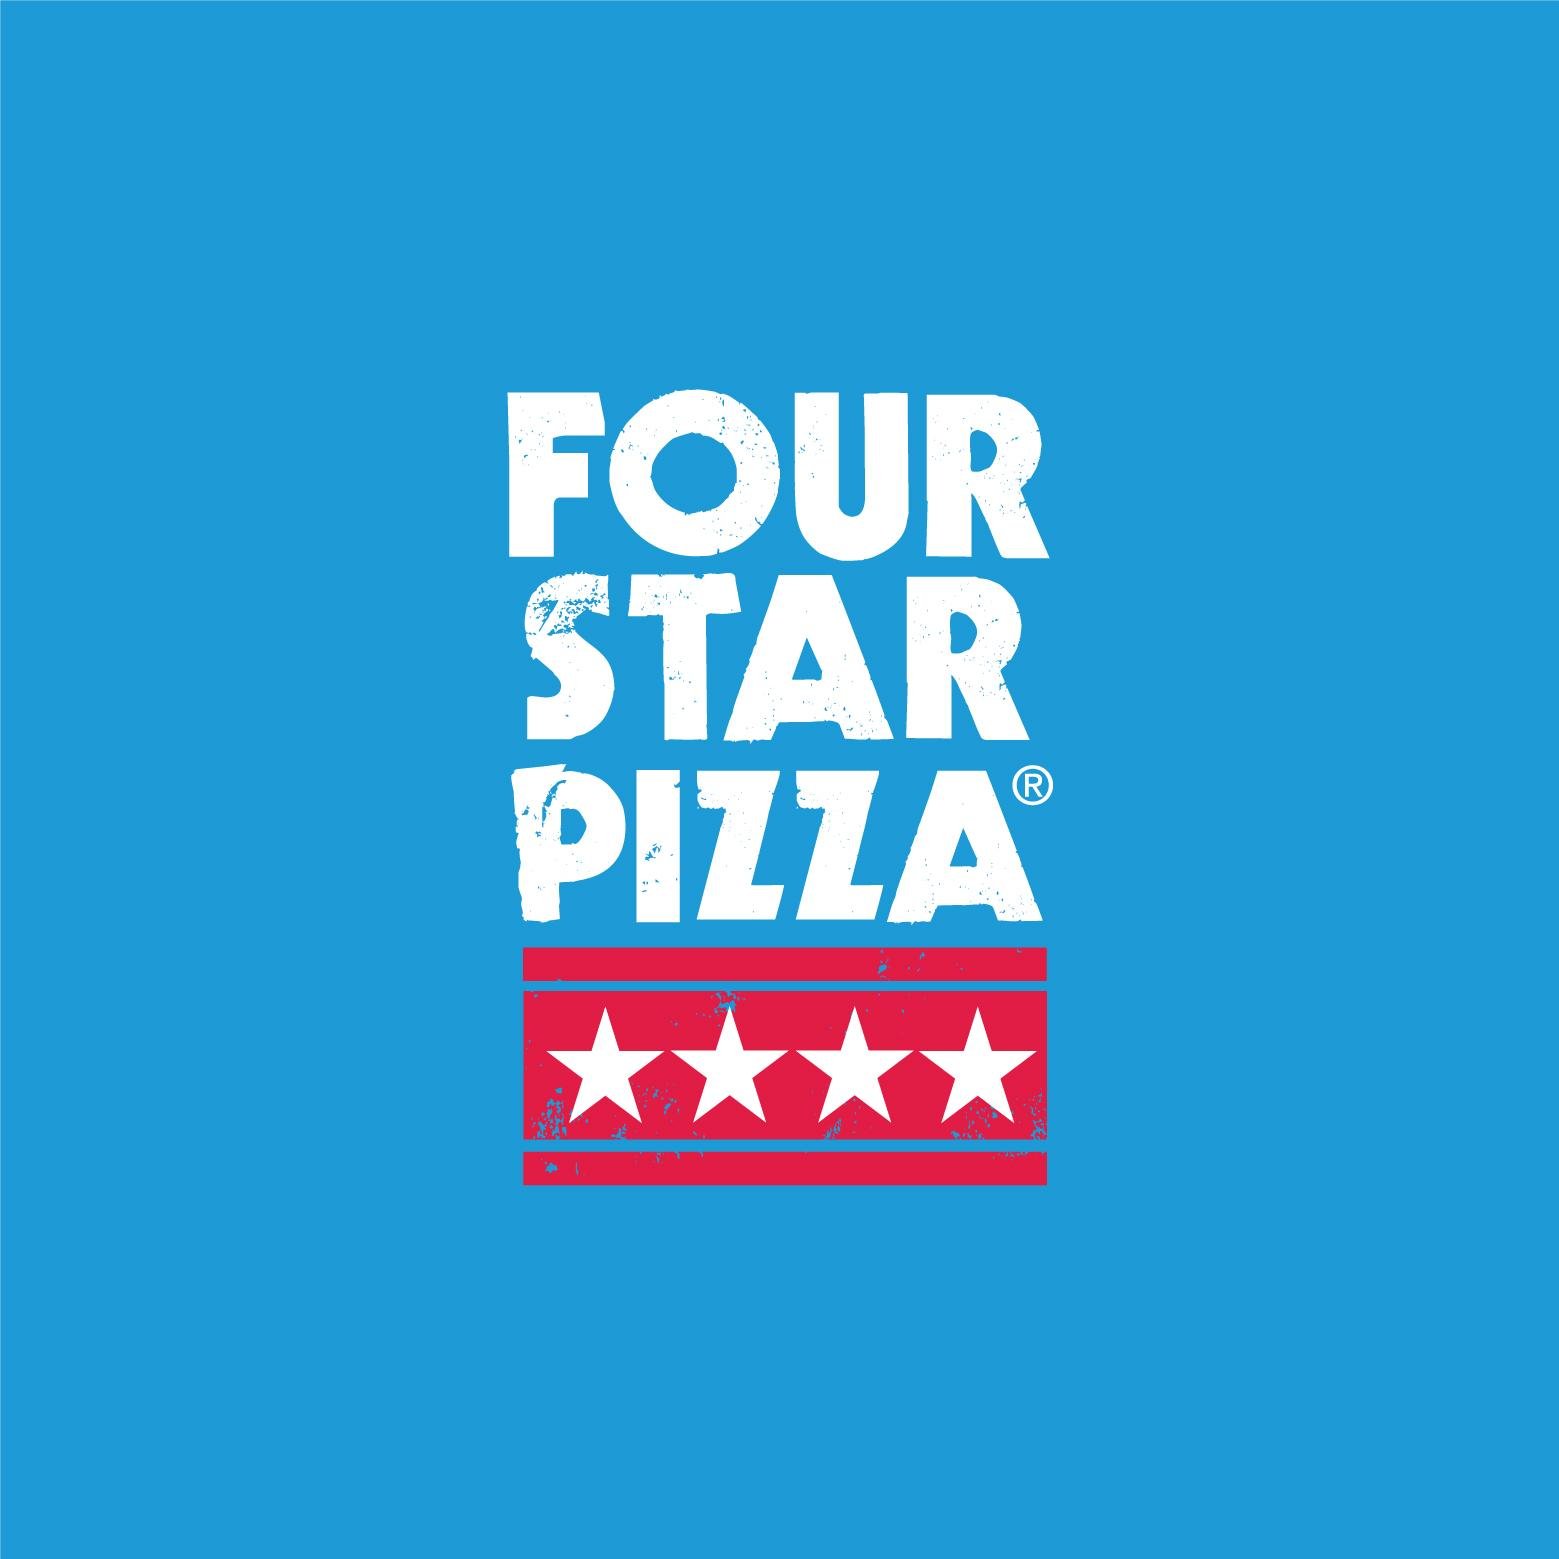 OUR STAR PIZZA – Board of Directors